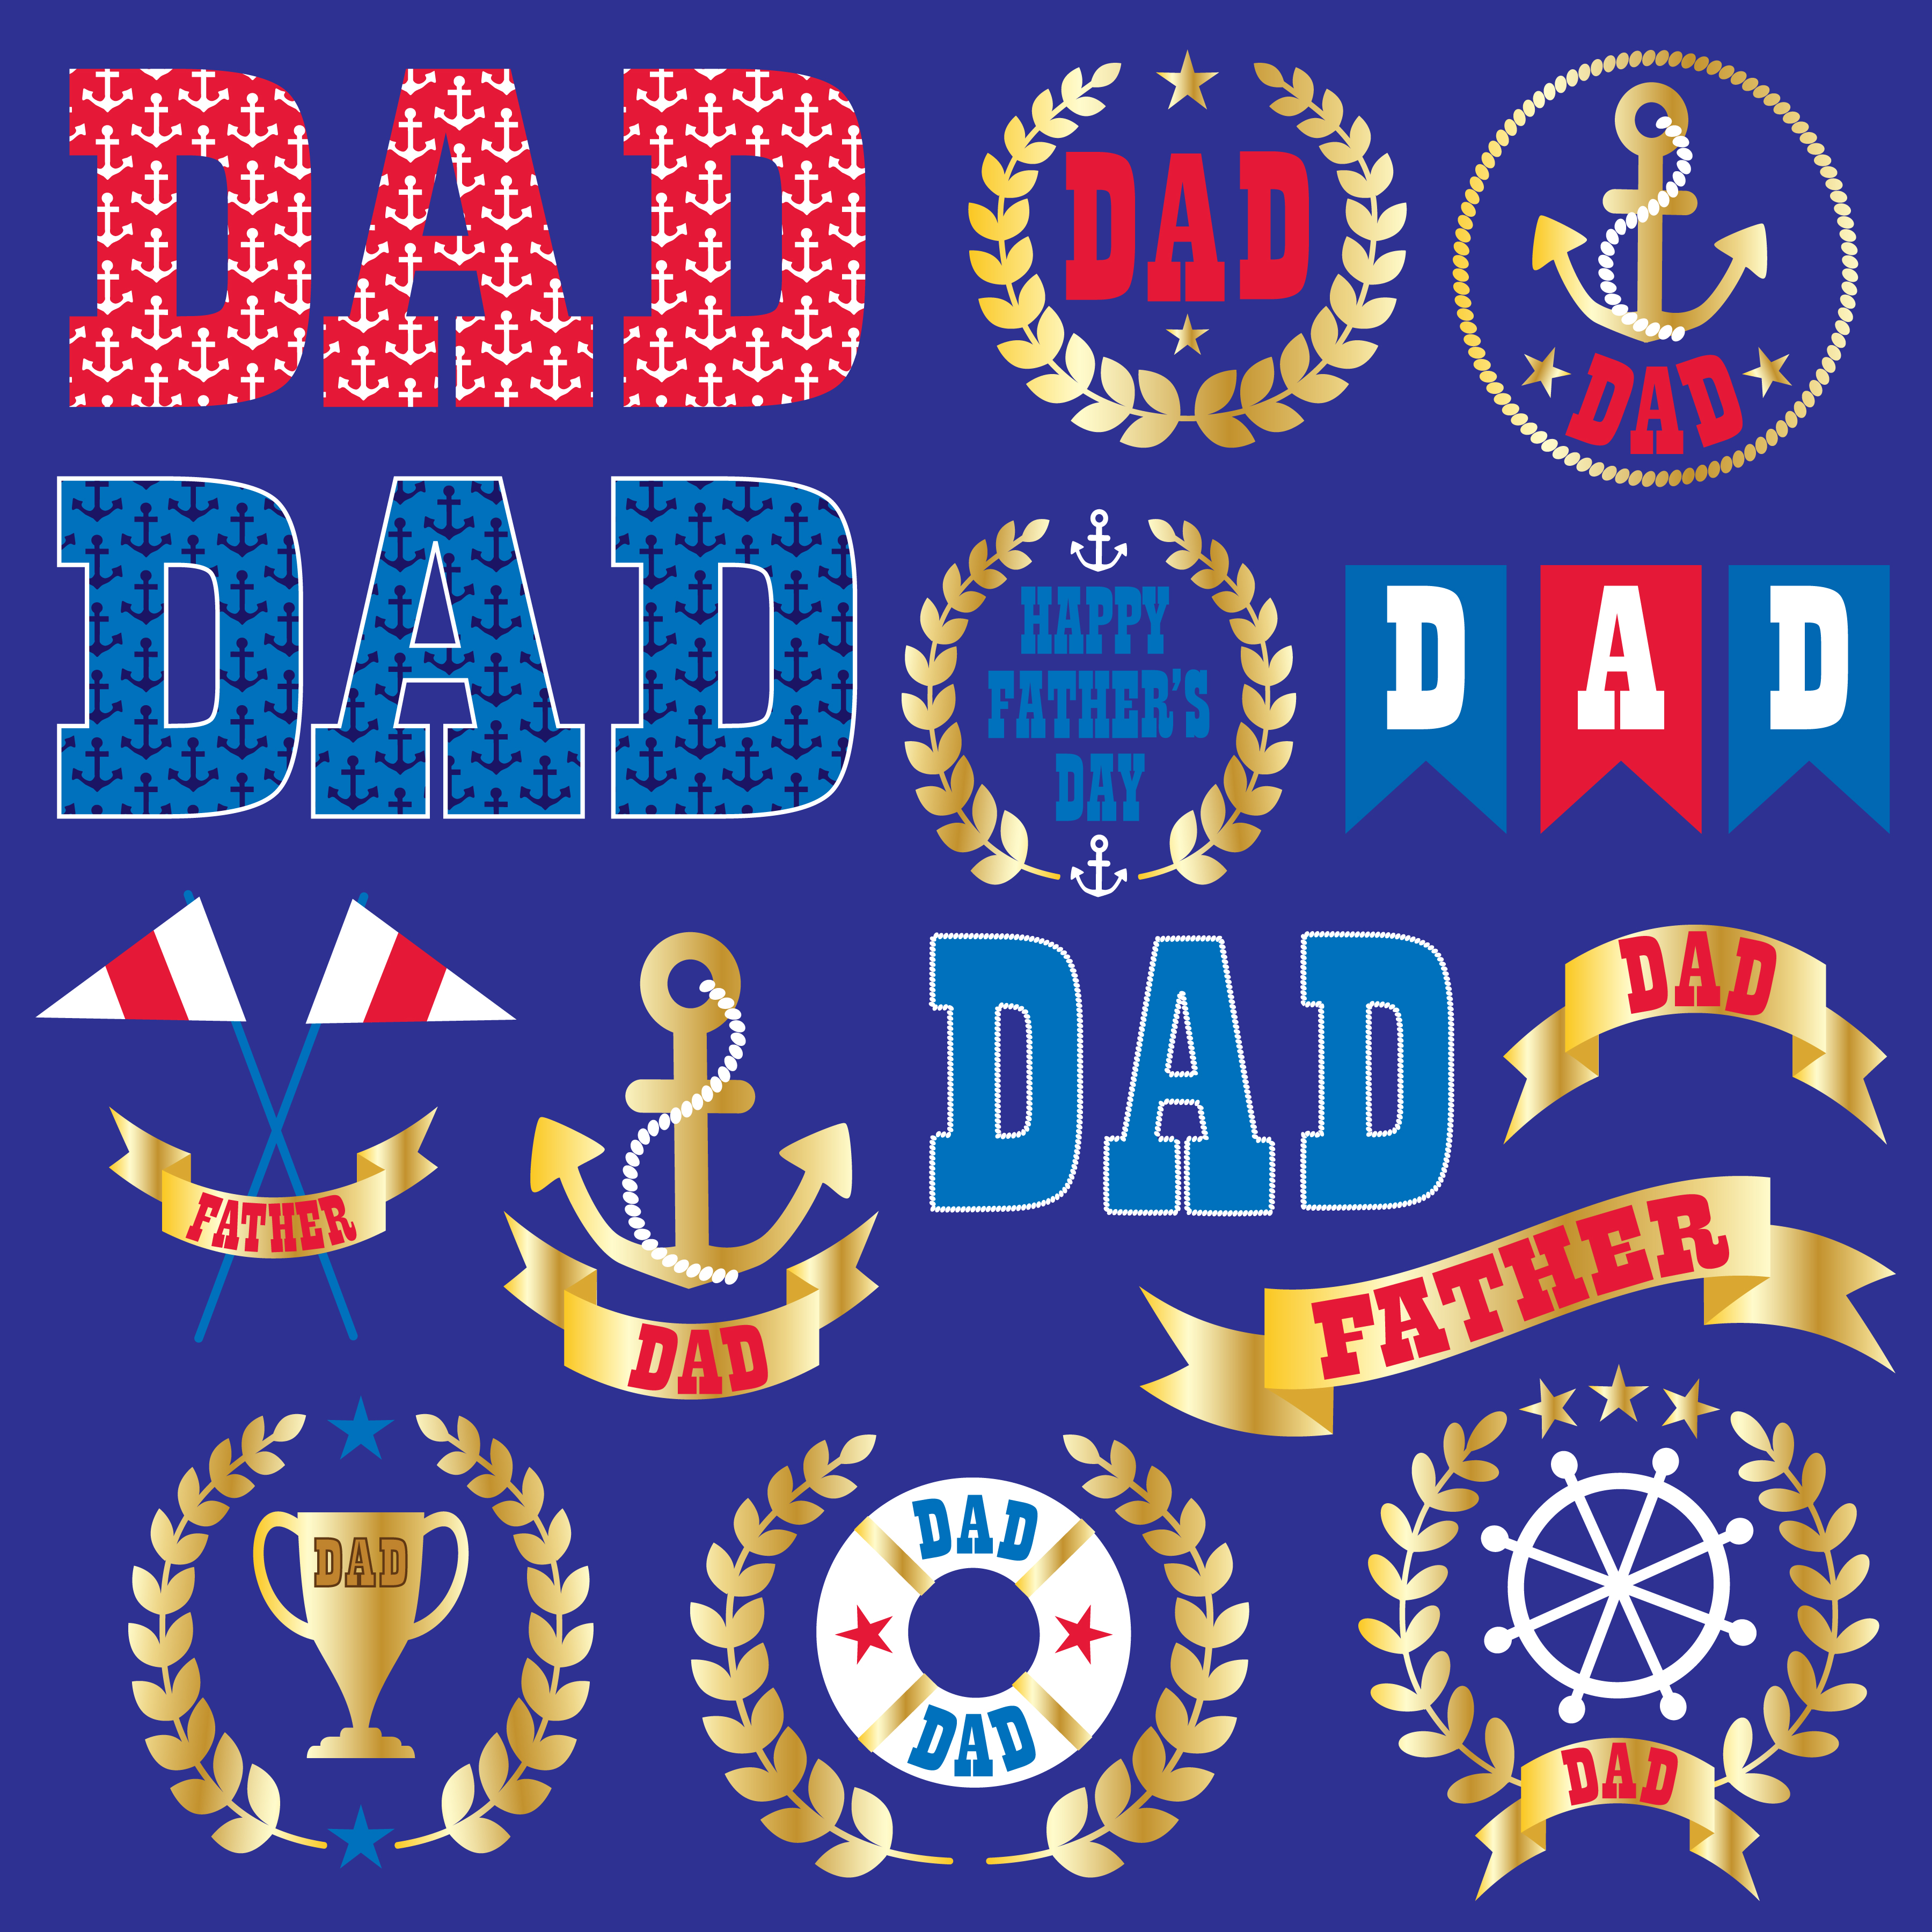 Download Nautical Father's Day clipart graphics - Download Free ...